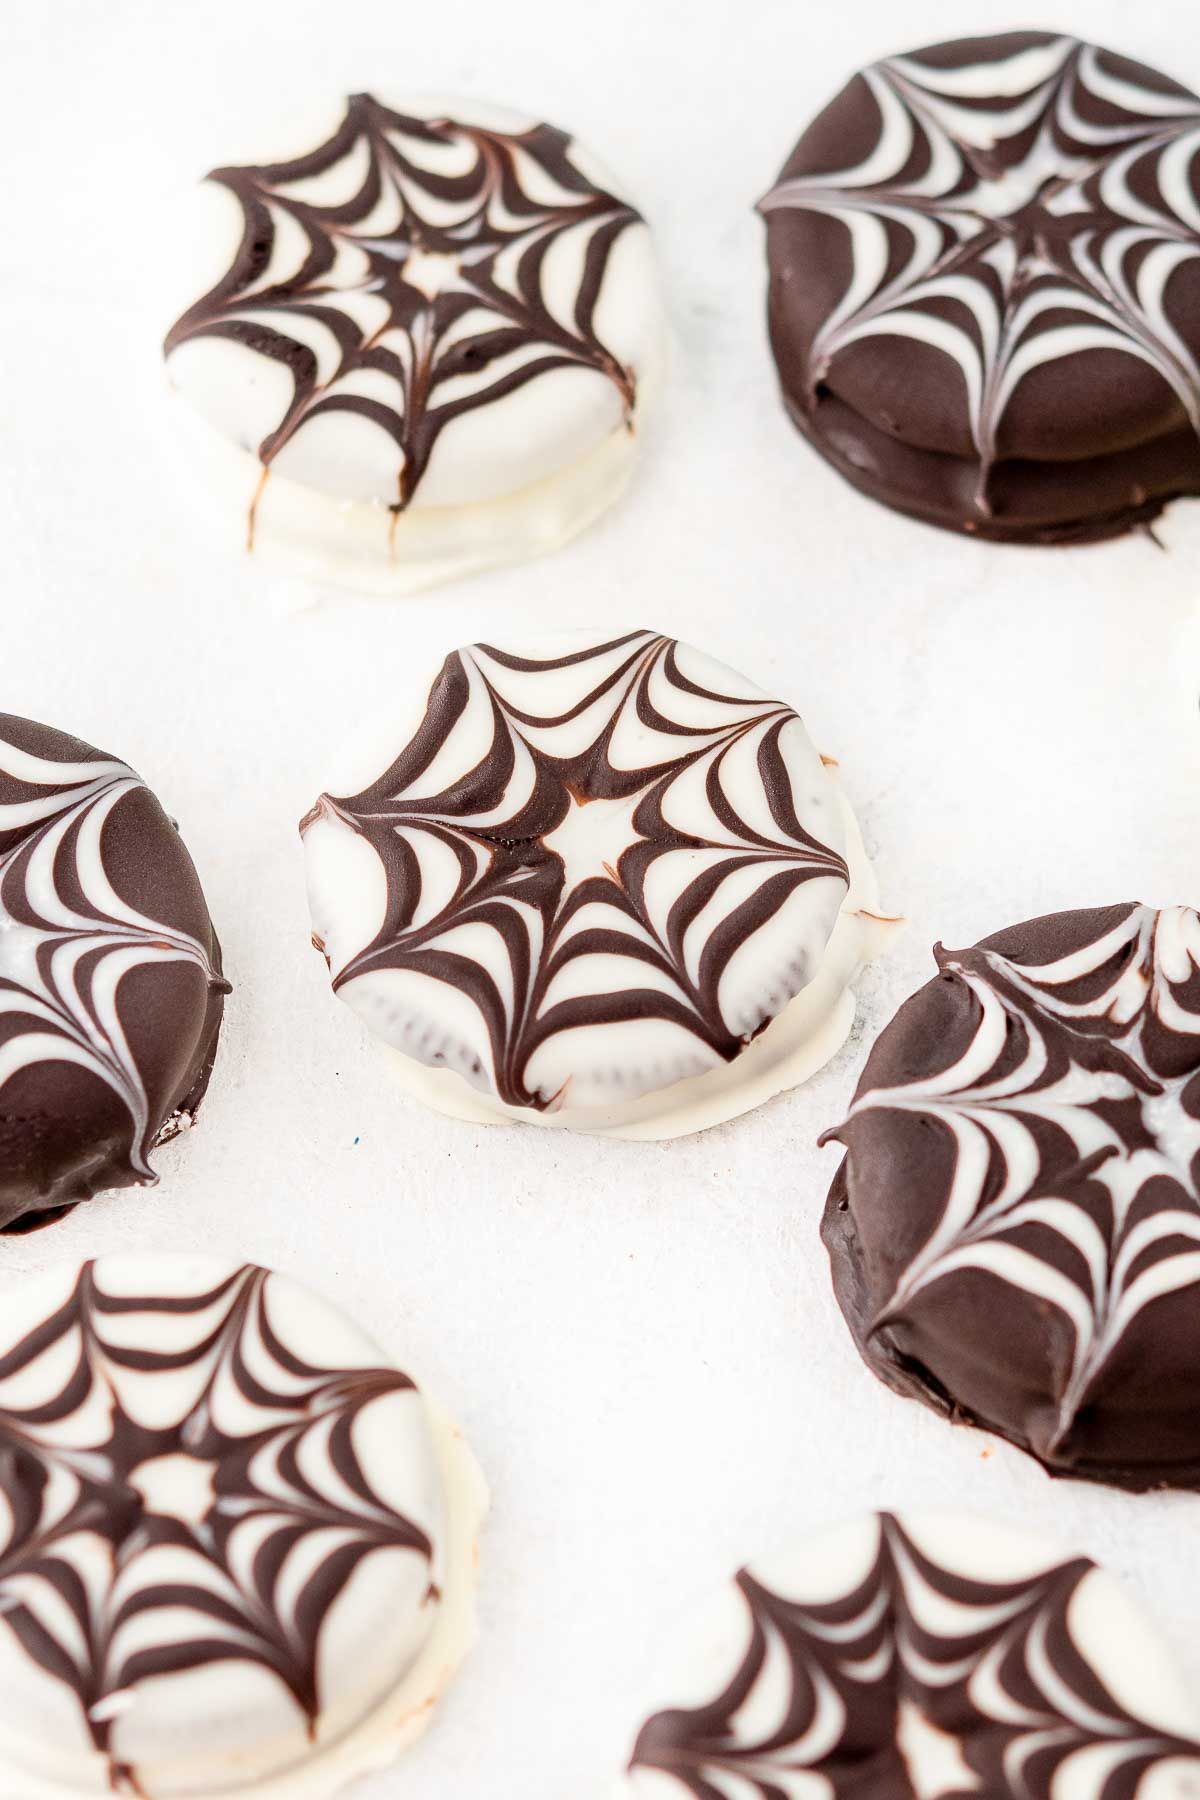 Halloween chocolate covered oreos made into spiderwebs, on a white surface.